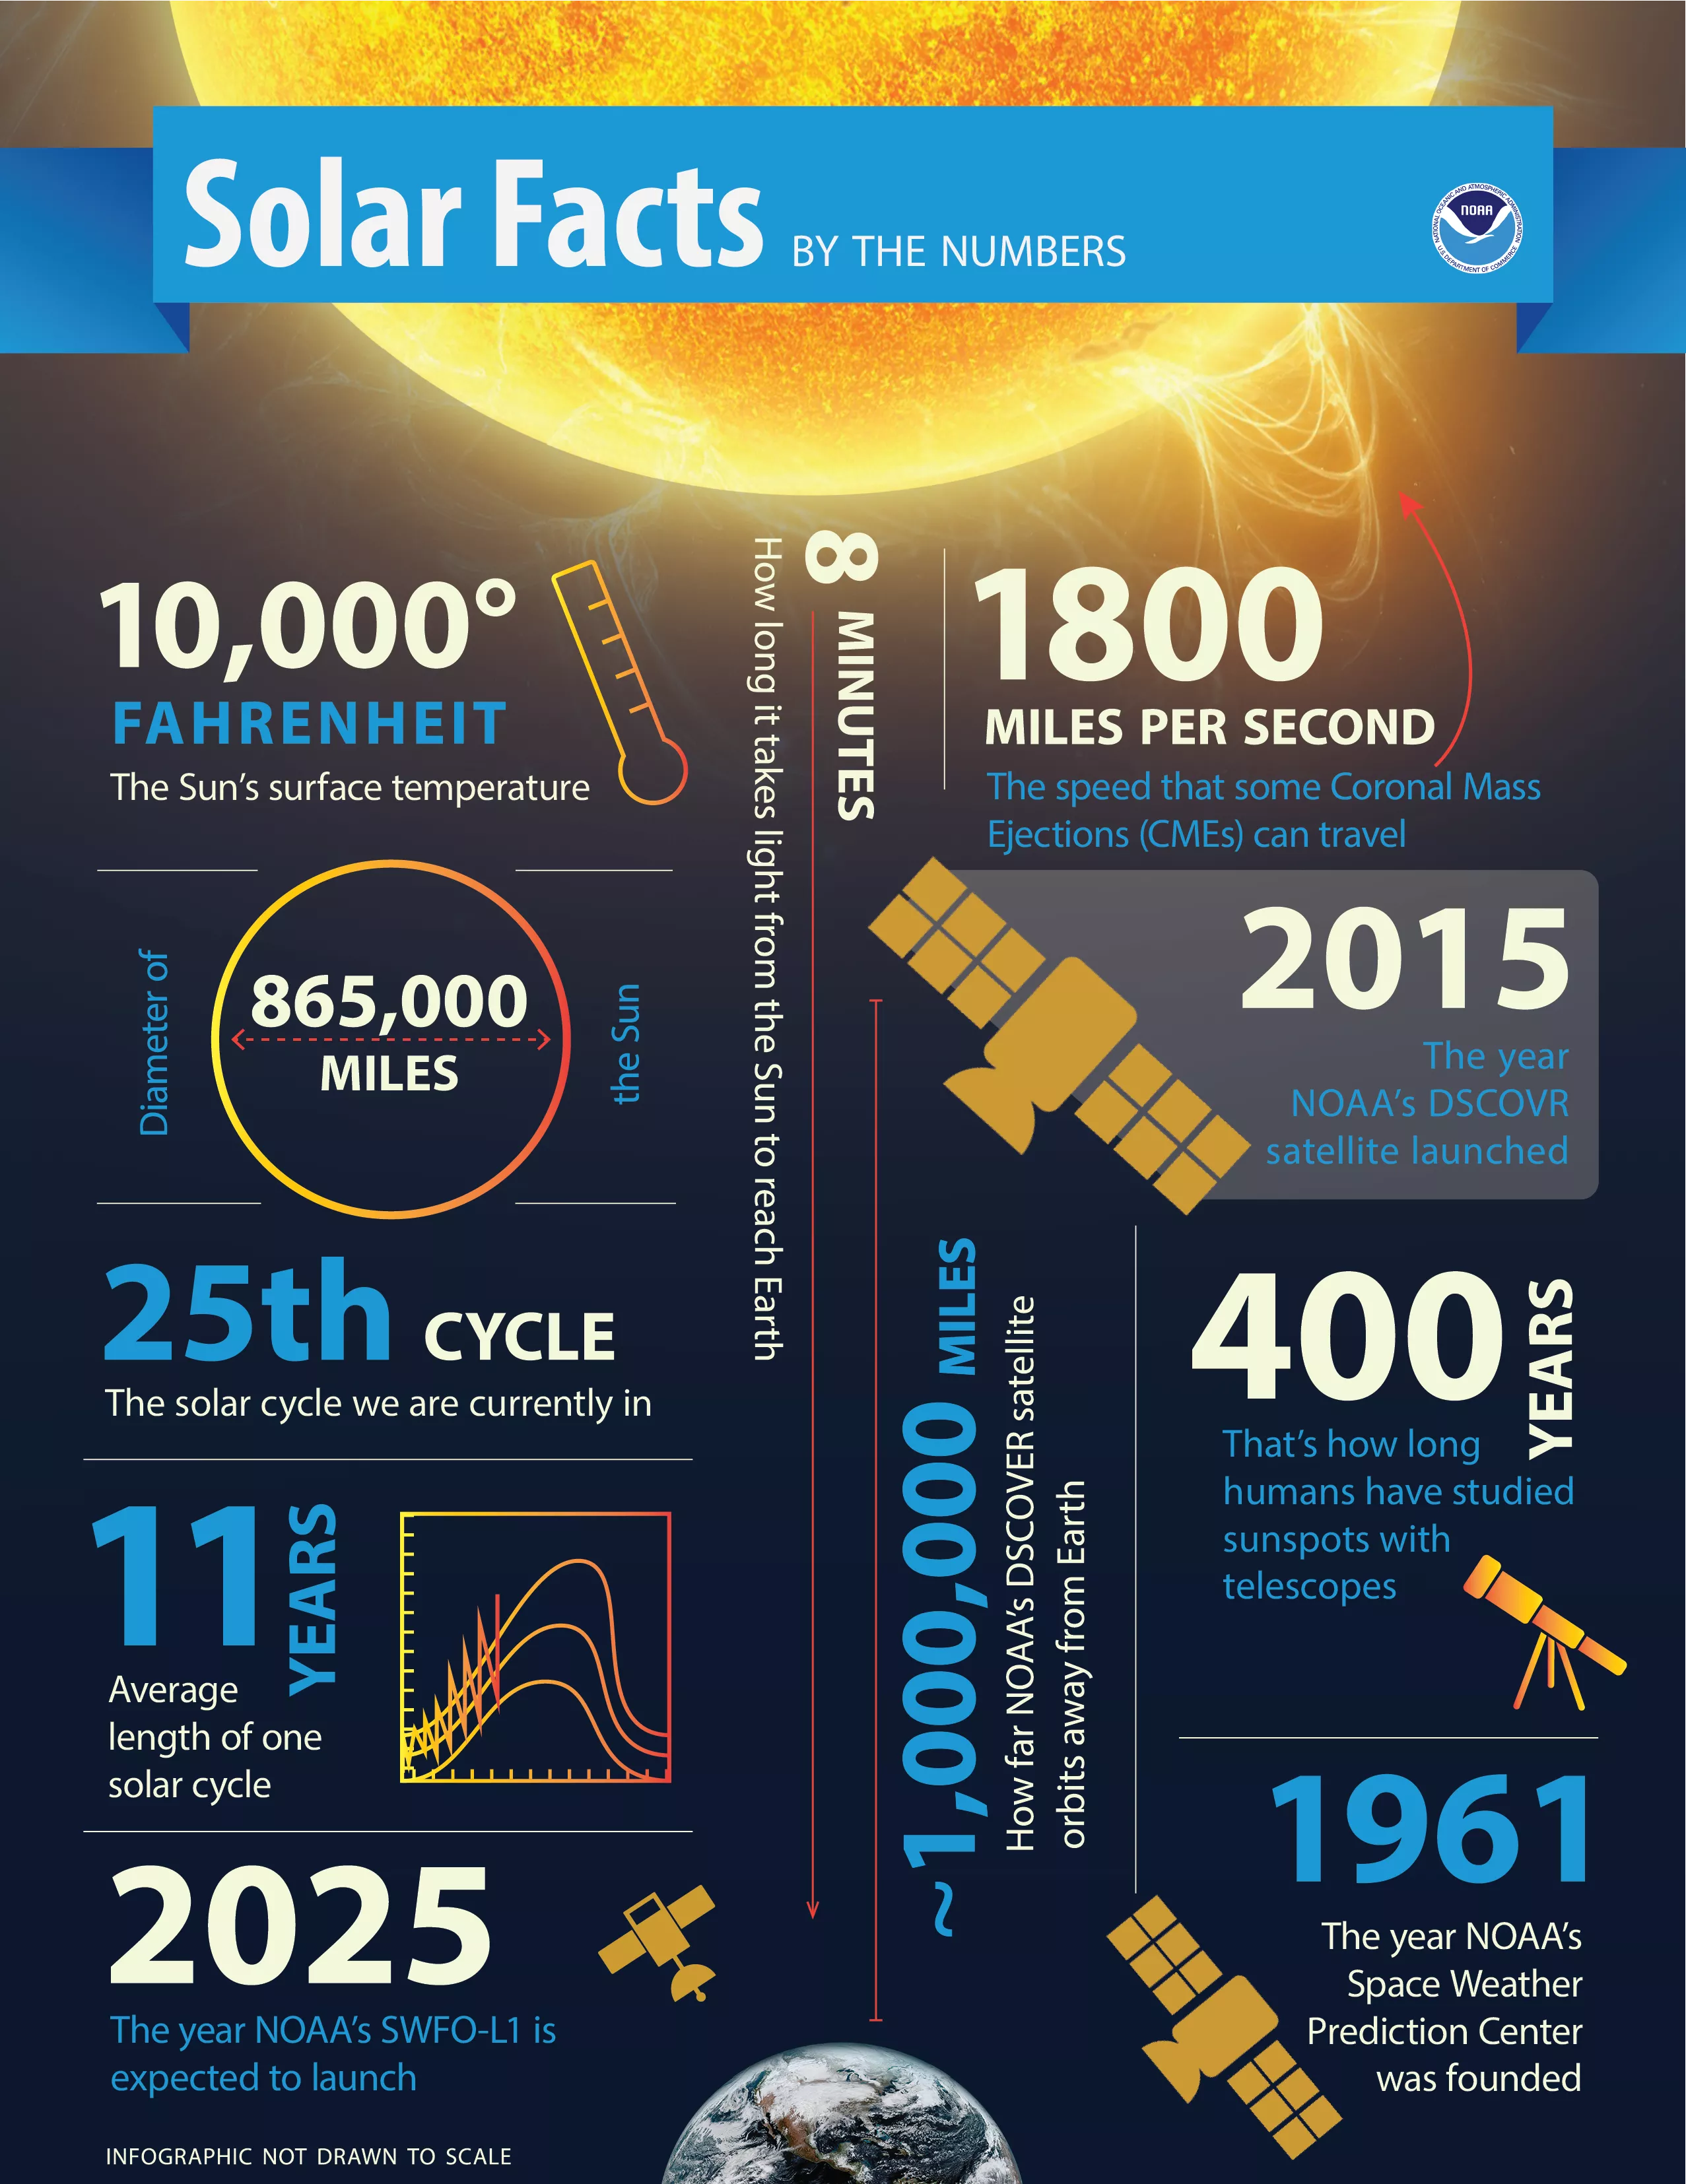 Infographic image for Solar Facs; 10,000 degrees = The Sun's surface temperature 865,000 kilometers = The Diameter of the Sun 25th Cycle = The solar cycle we are currently in 11 years = Average length of one solar cycle 2025 = The year NOAA's SWFO-L1 is expected to launch 8 minutes = How long it takes light from the Sun to reach Earth 1800 miles per second = The speed that some Coronal Mass Ejections (CMEs) can travel 2015 = The year NOAA's DSCOVR satellite launched ~1,000,000 miles = How far NOAA's DSCOVR 